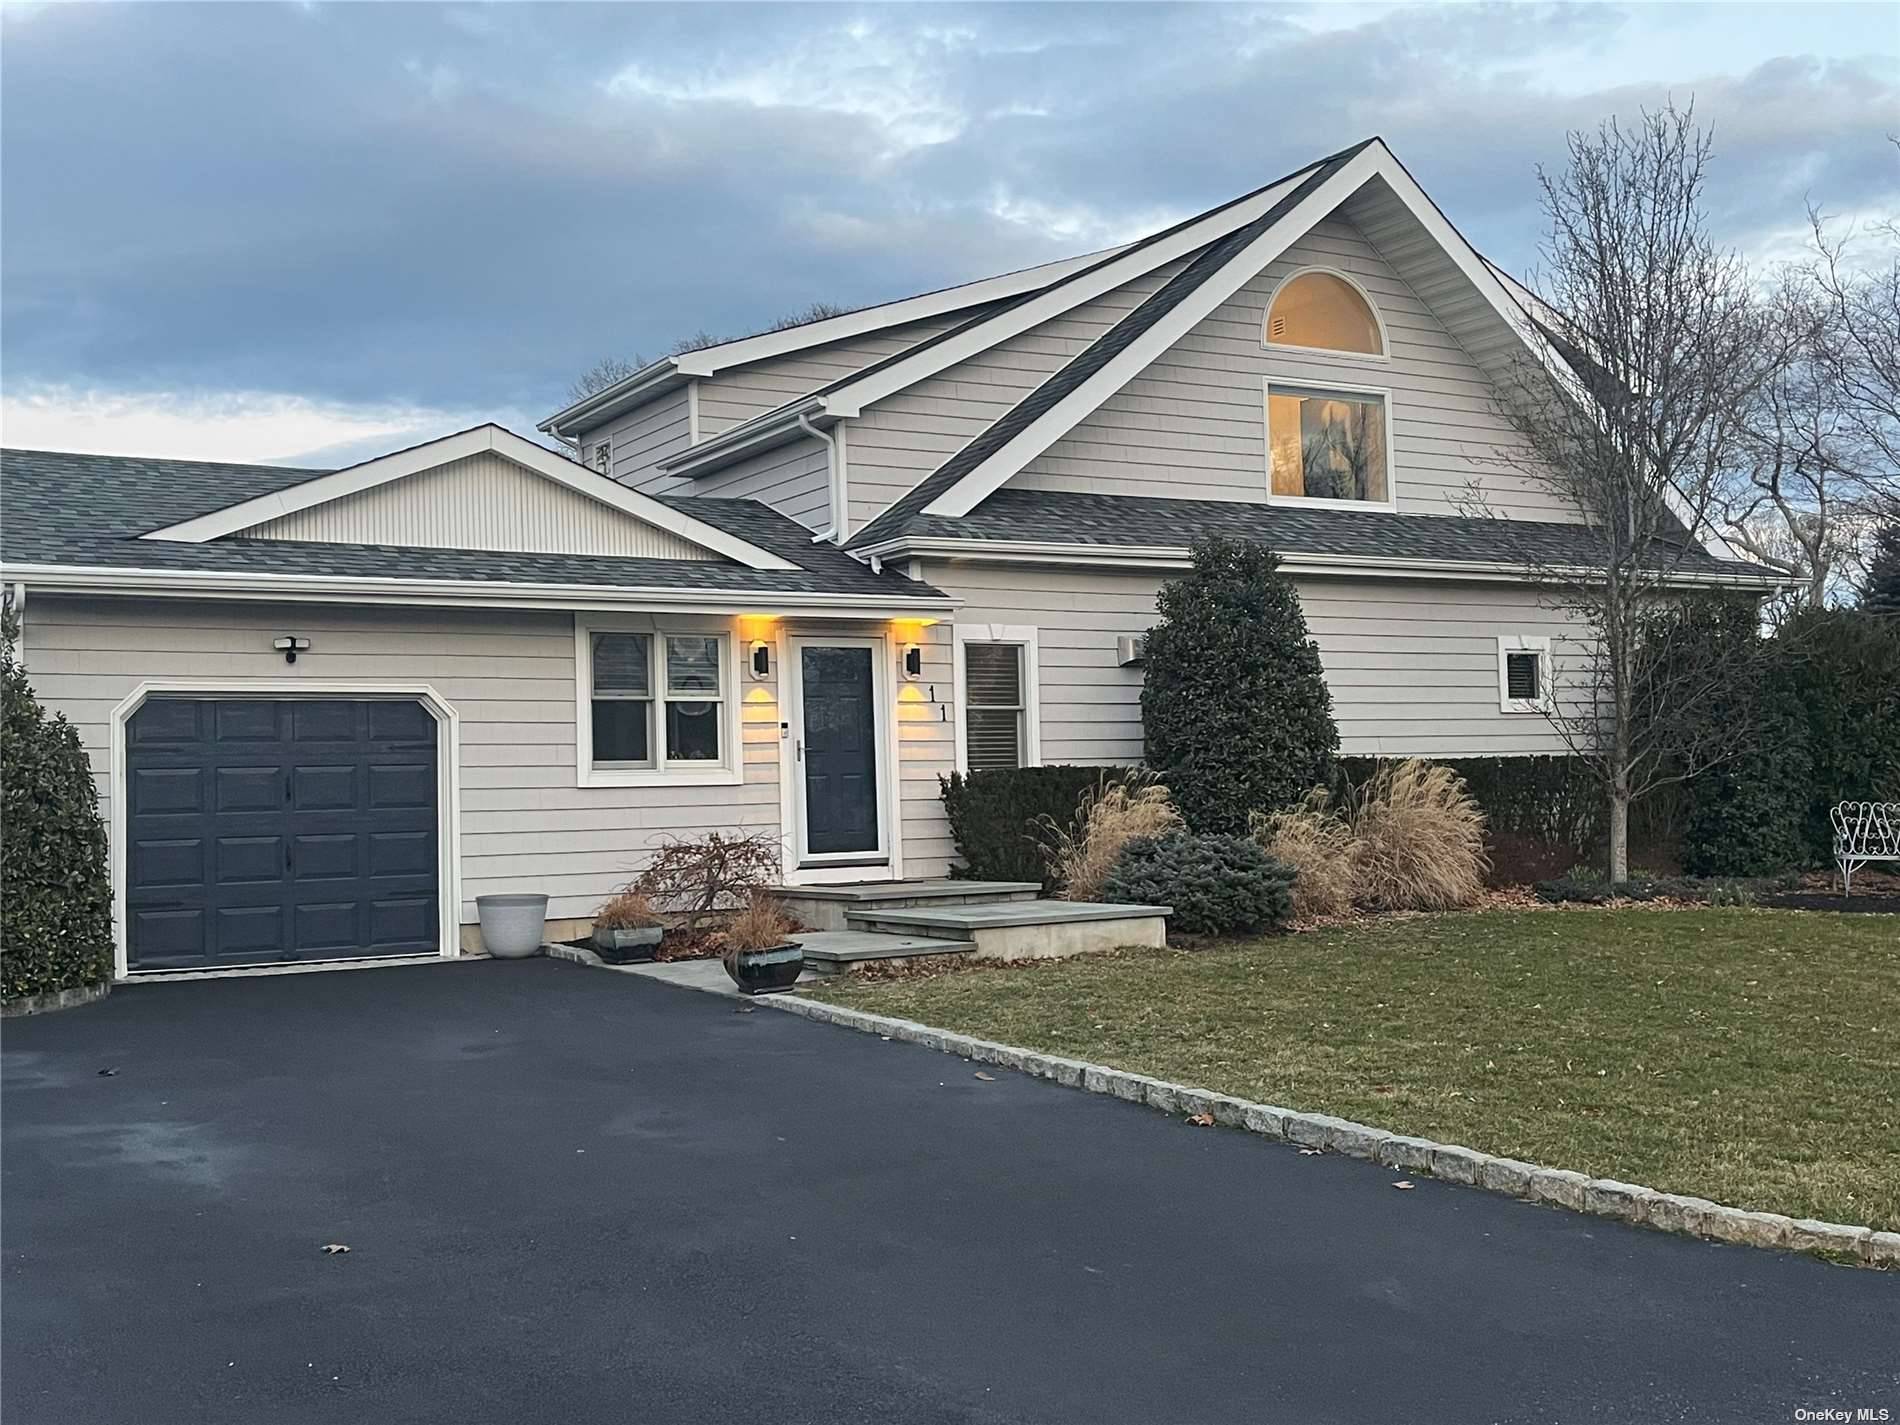 Best deal on unique home in Shinnecock Shores, a private bay community, with private fenced yard !